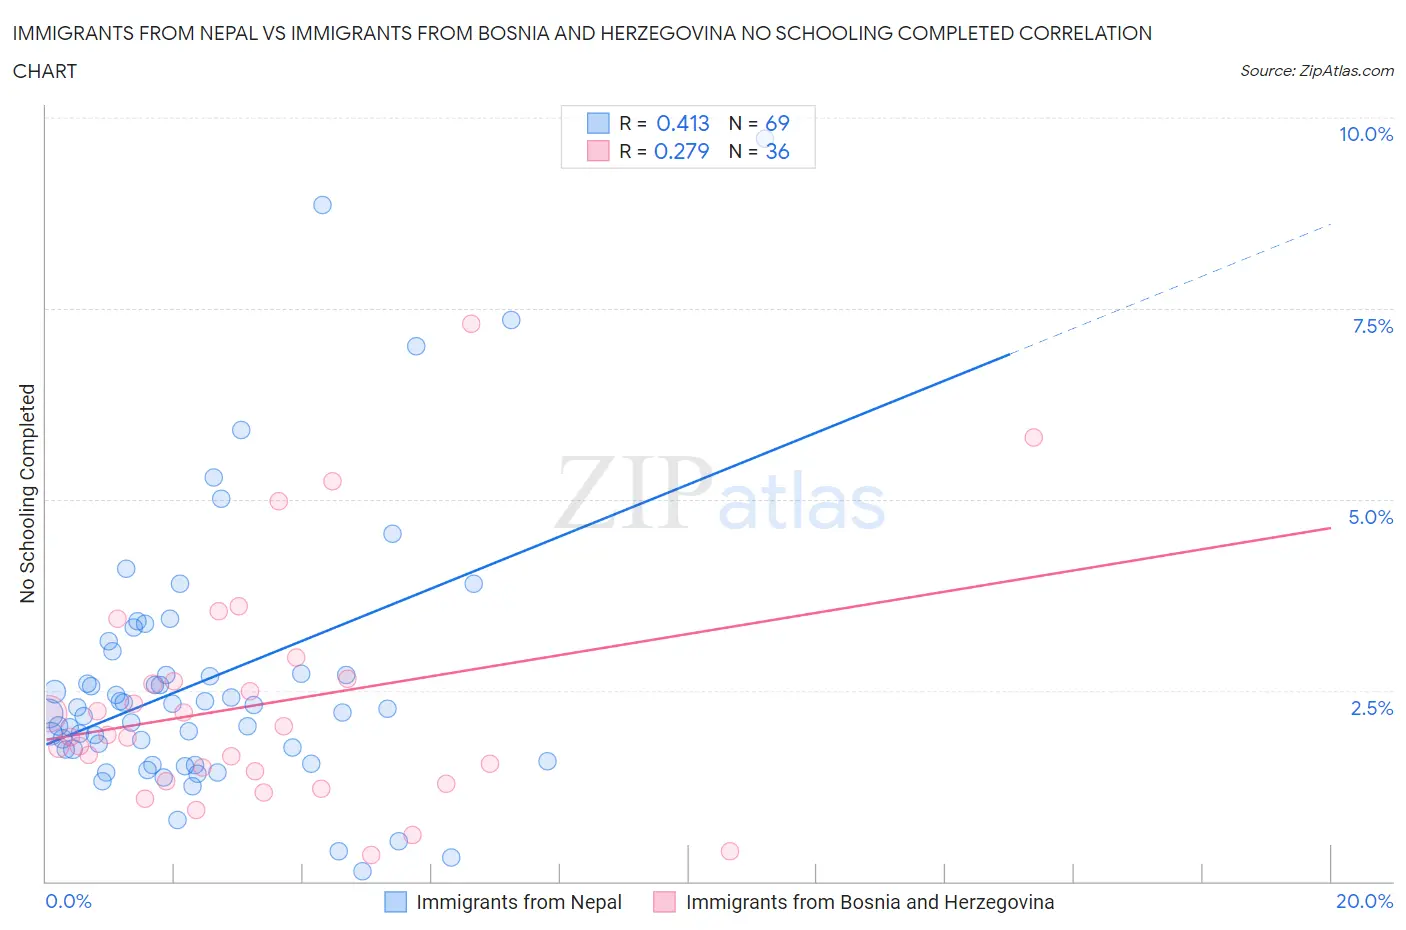 Immigrants from Nepal vs Immigrants from Bosnia and Herzegovina No Schooling Completed